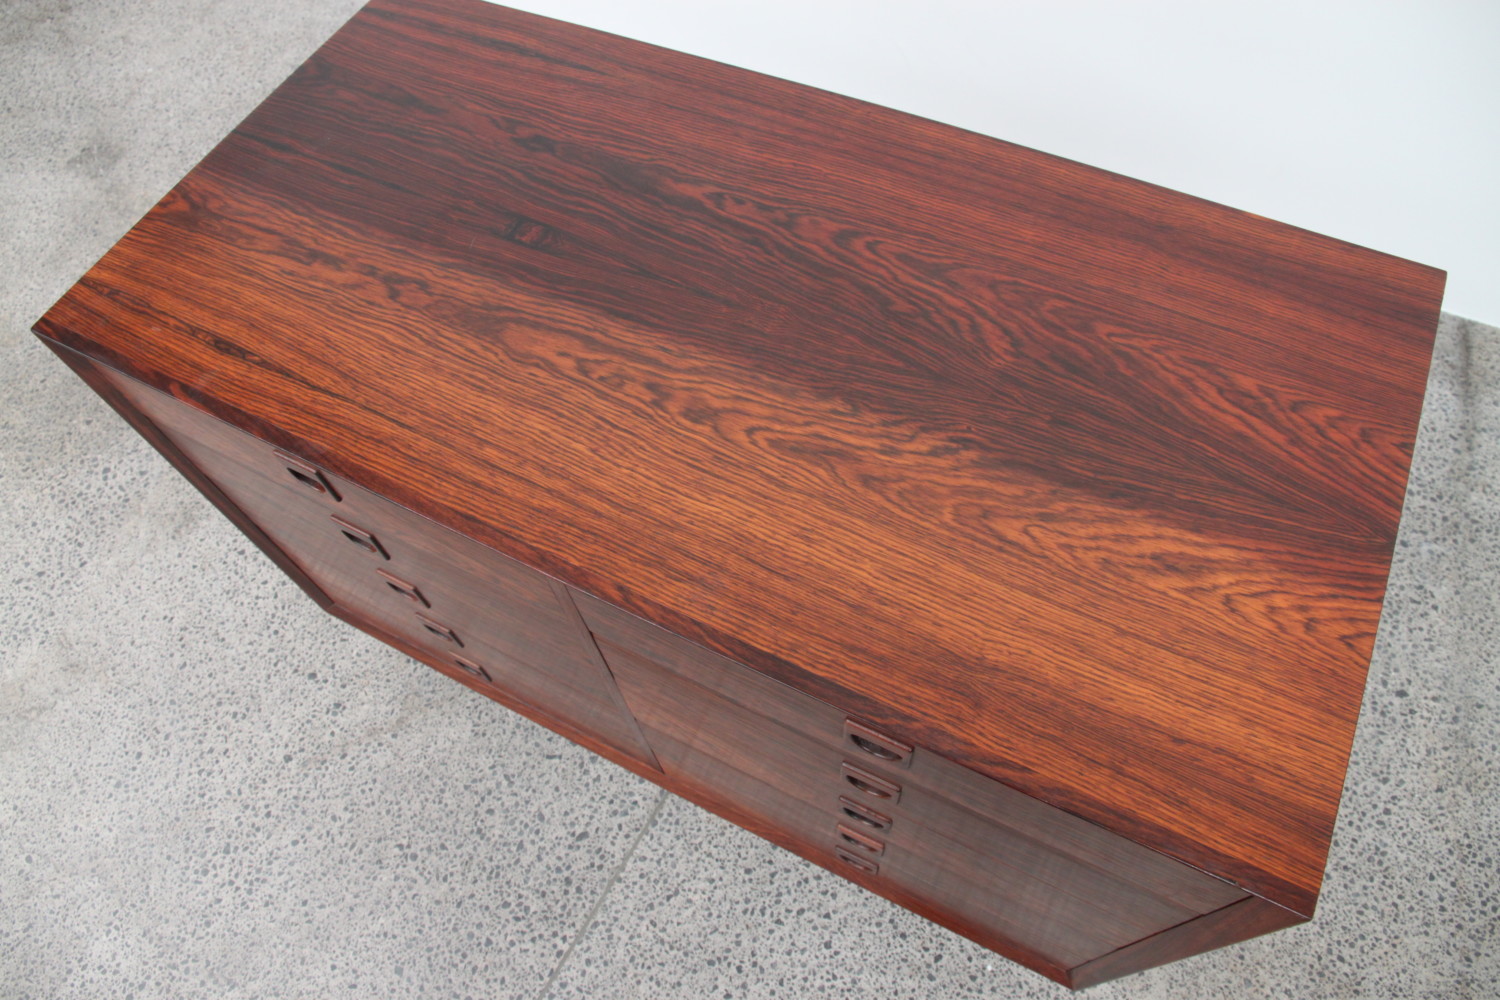 Rosewood Chest Of Drawers